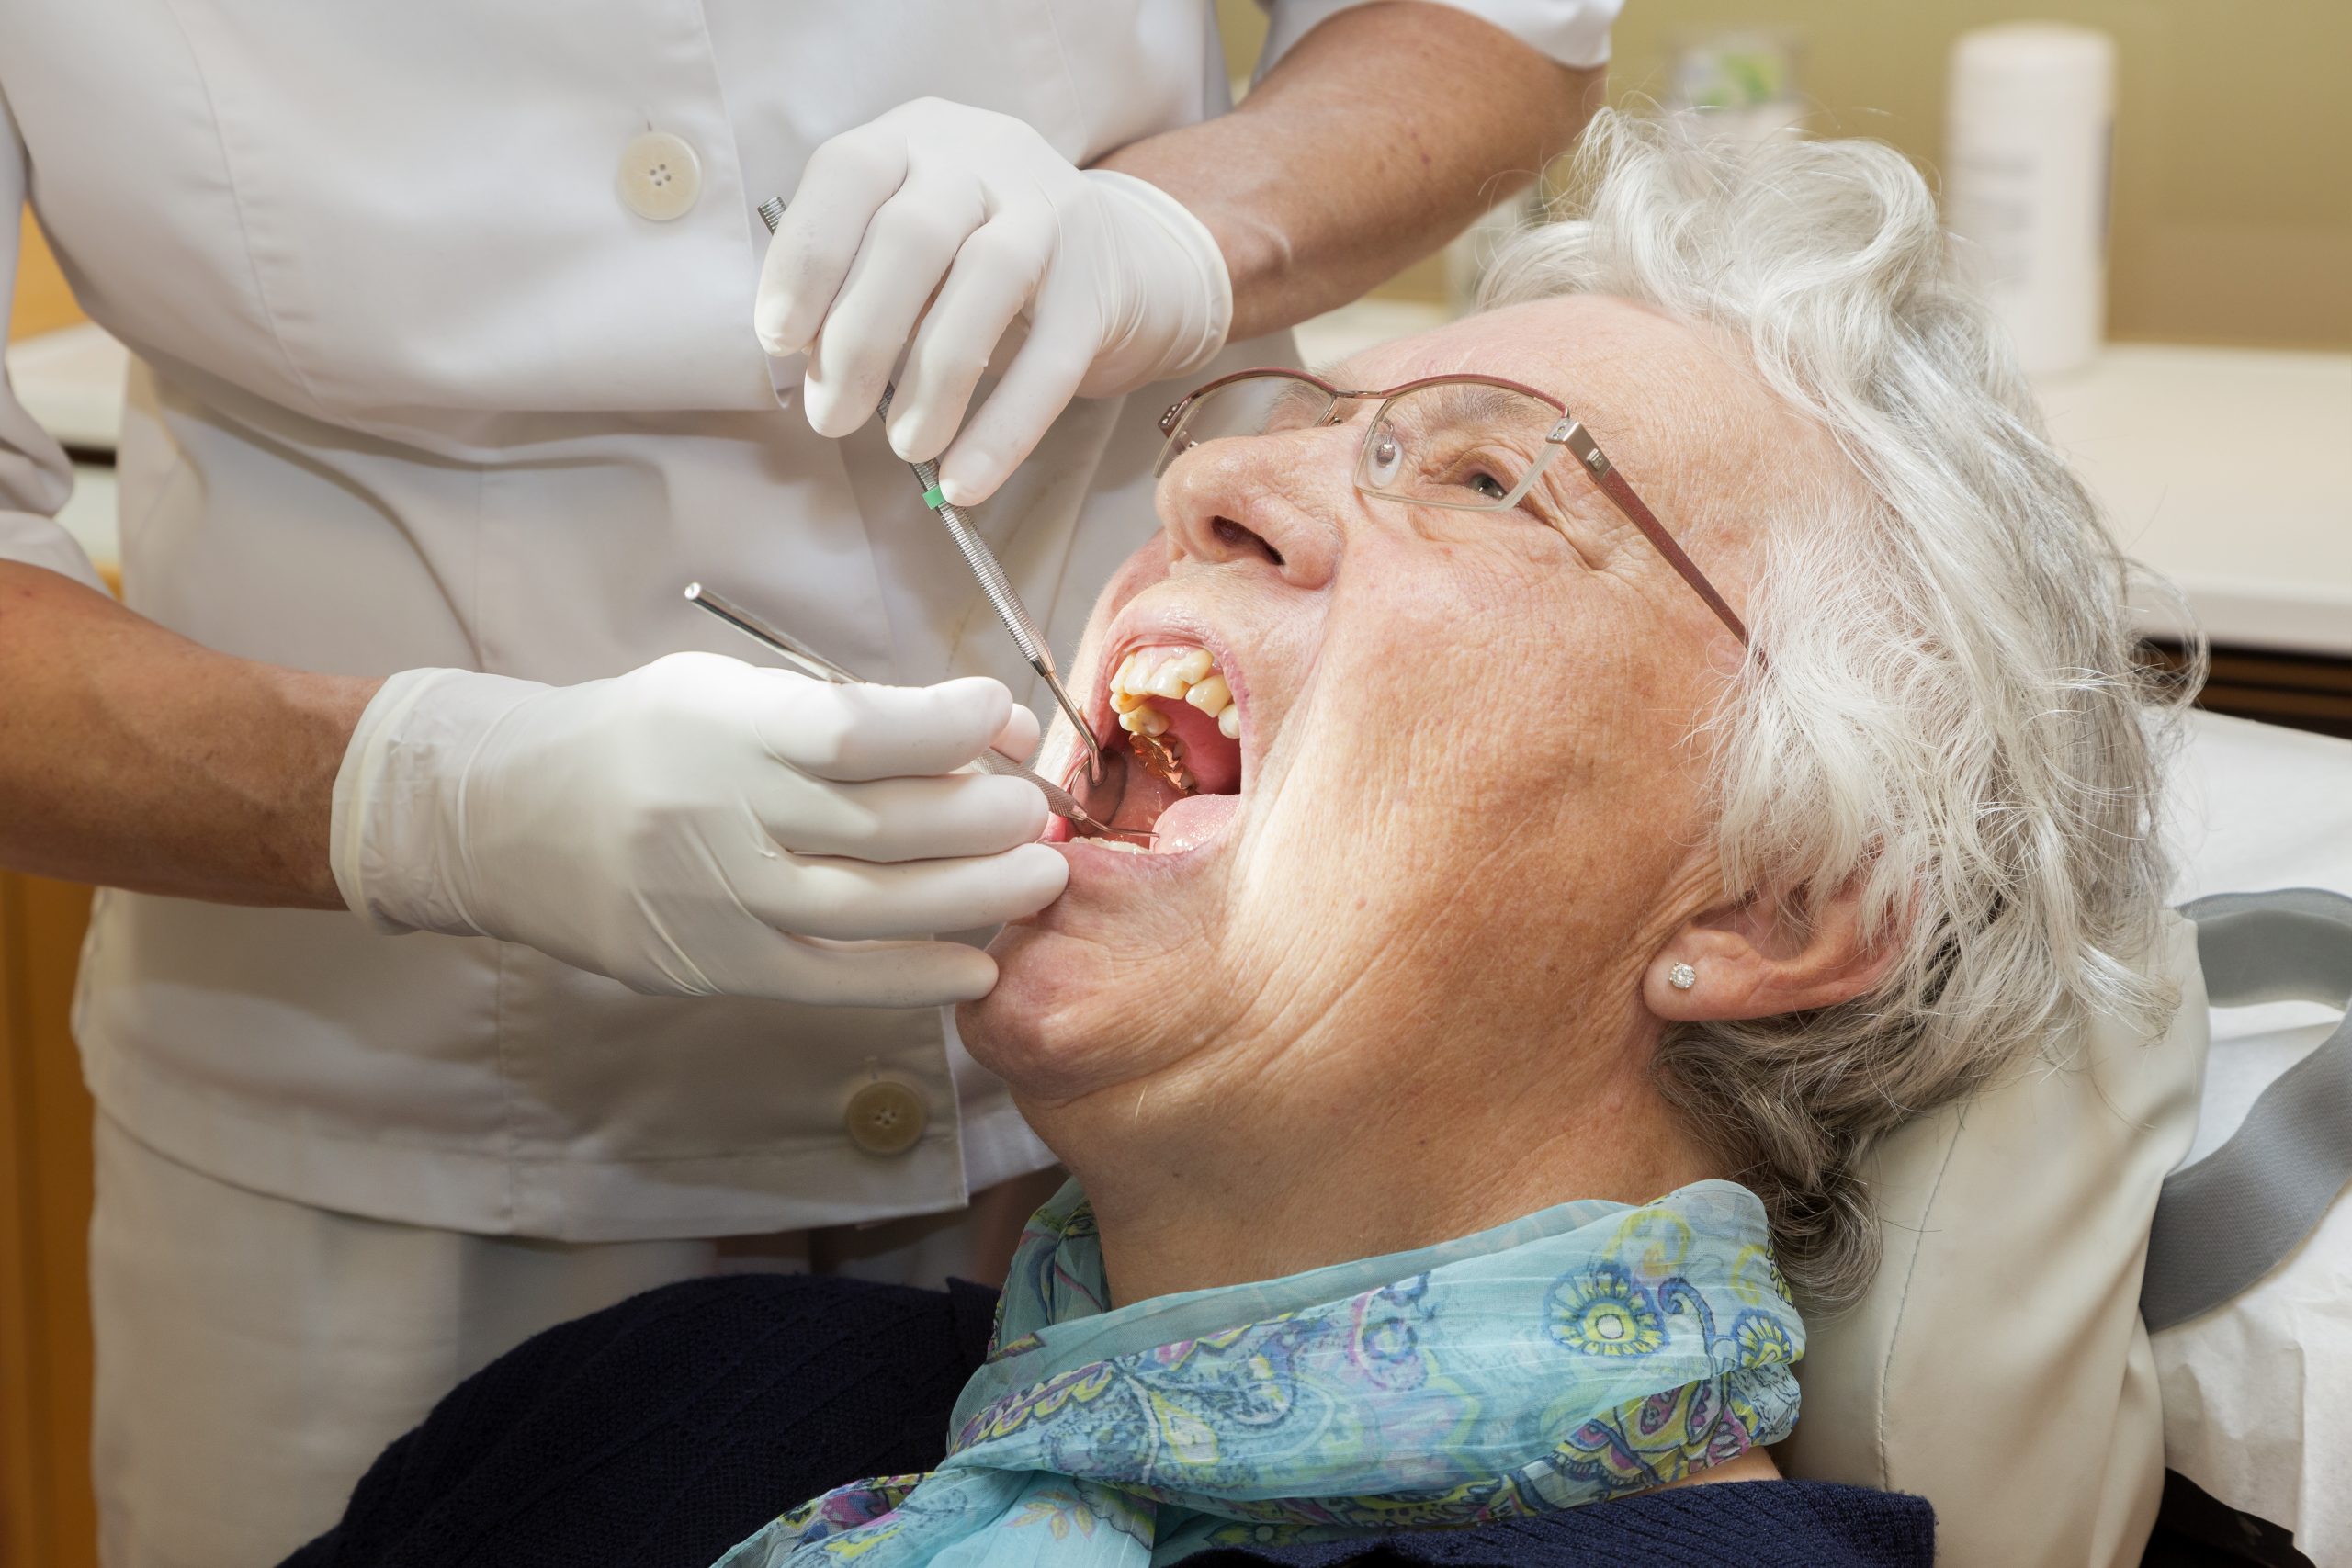 A Third of Medicare Beneficiaries Don't Get Regular Dental Care - Dentistry  Today